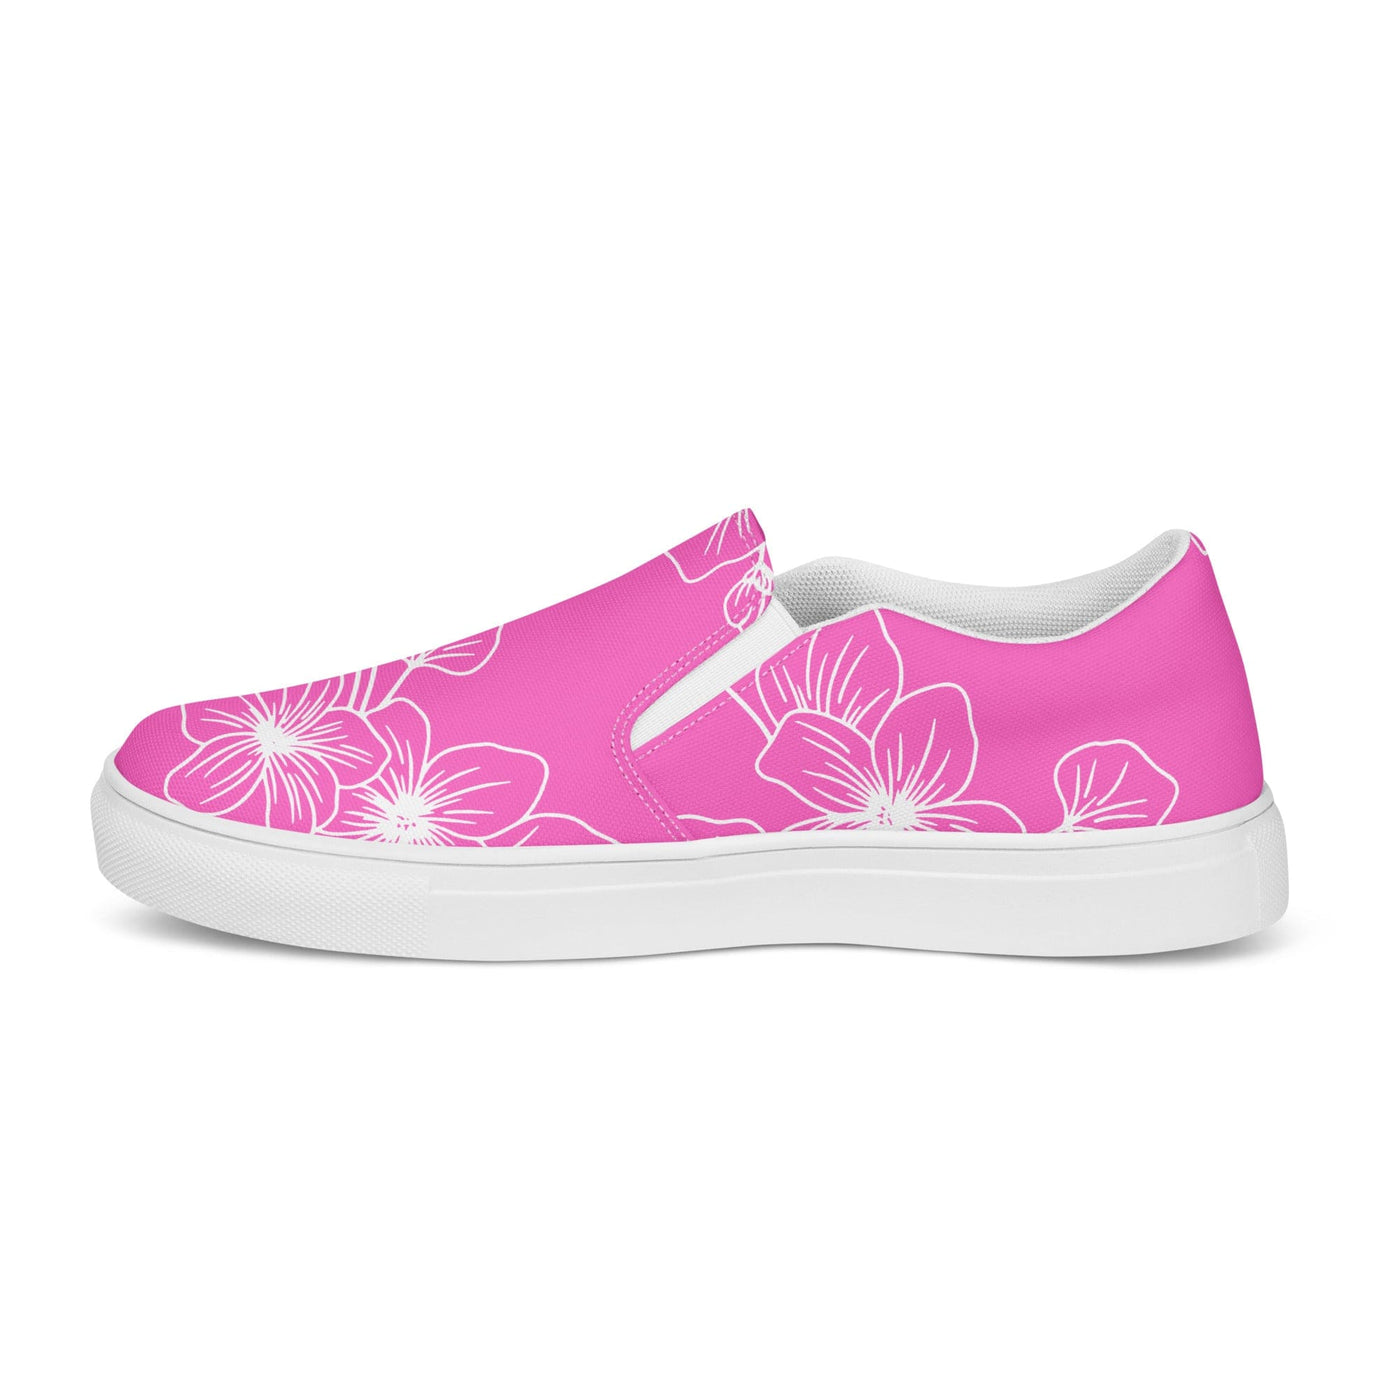 Womens Slip-on Canvas Shoes Pink Floral Print - Womens | Sneakers